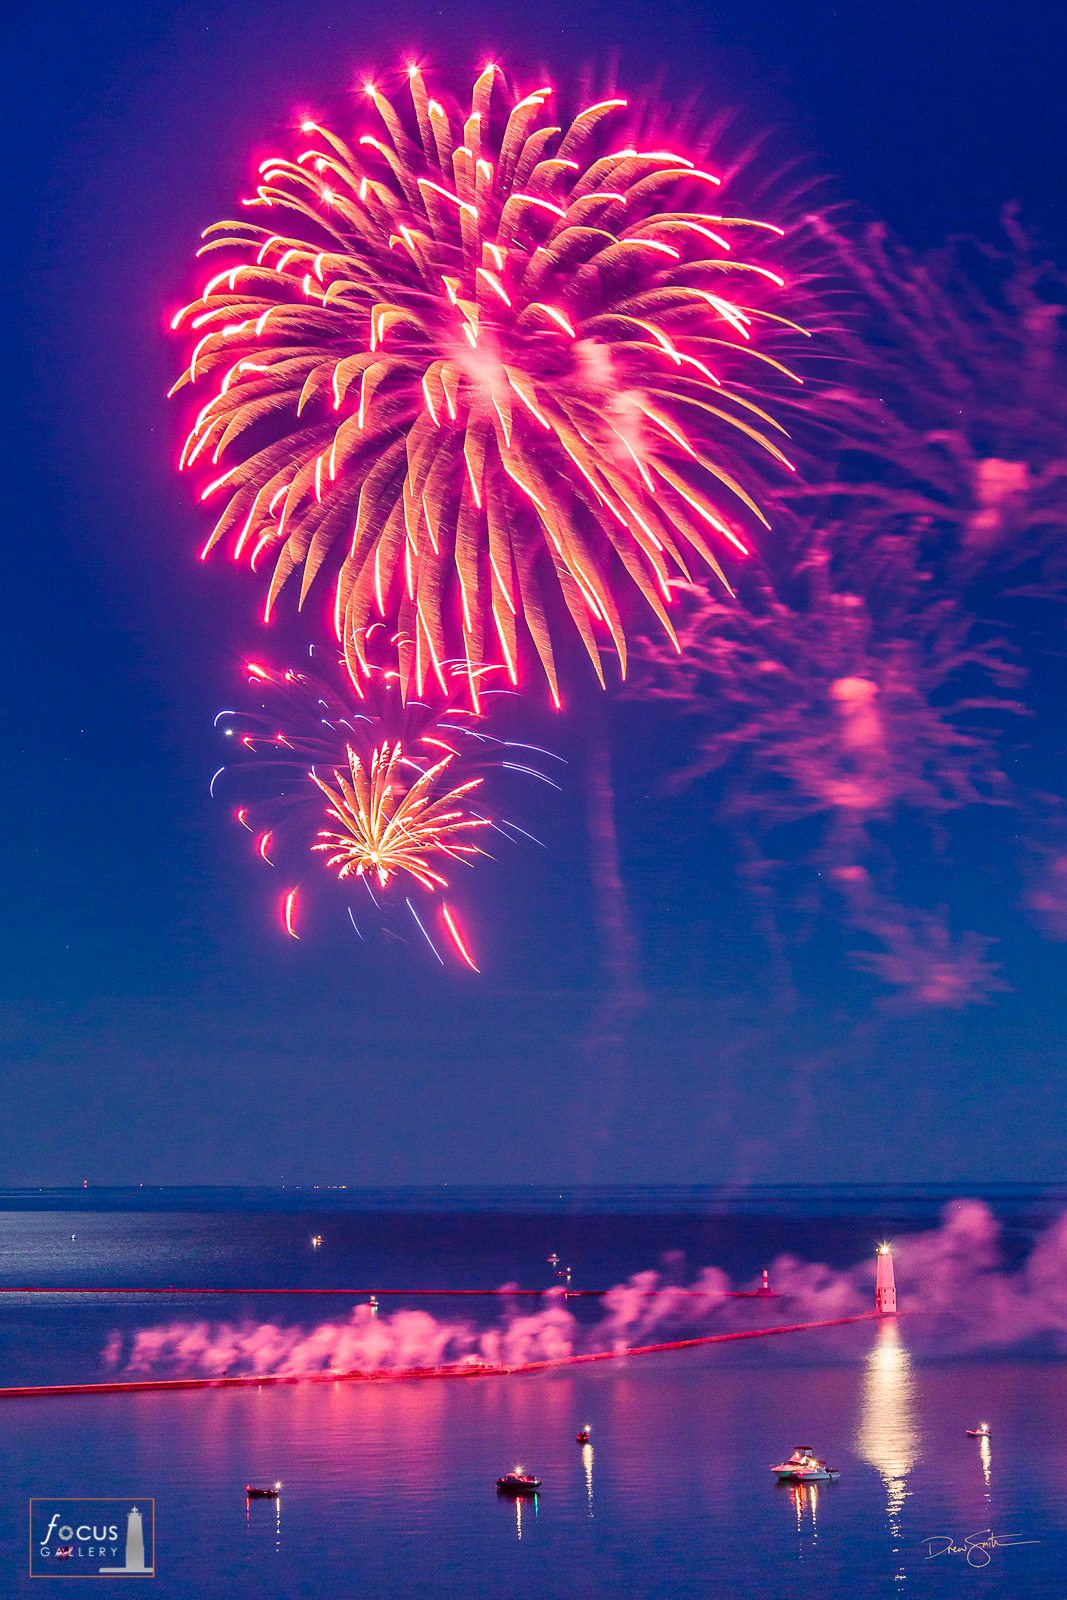 Fireworks explode over the Frankfort harbor on the Fourth of July, Frankfort, Michigan